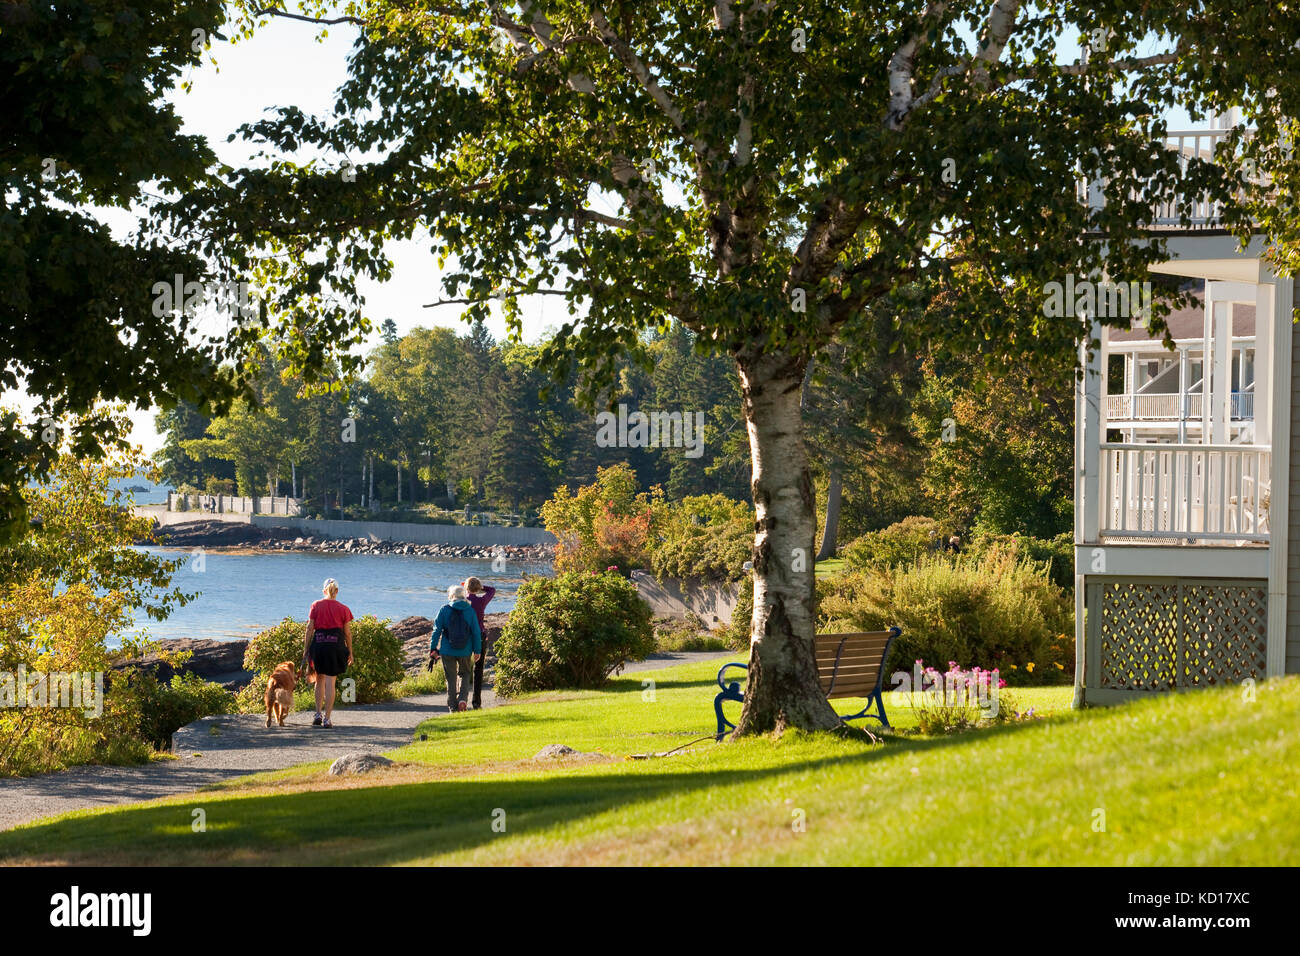 Popular 'Shore Path' that starts in Bar Harbor and extends three quarters of a mile along Frenchman Bay, Bar Harbor, Maine, U.S.A. Stock Photo